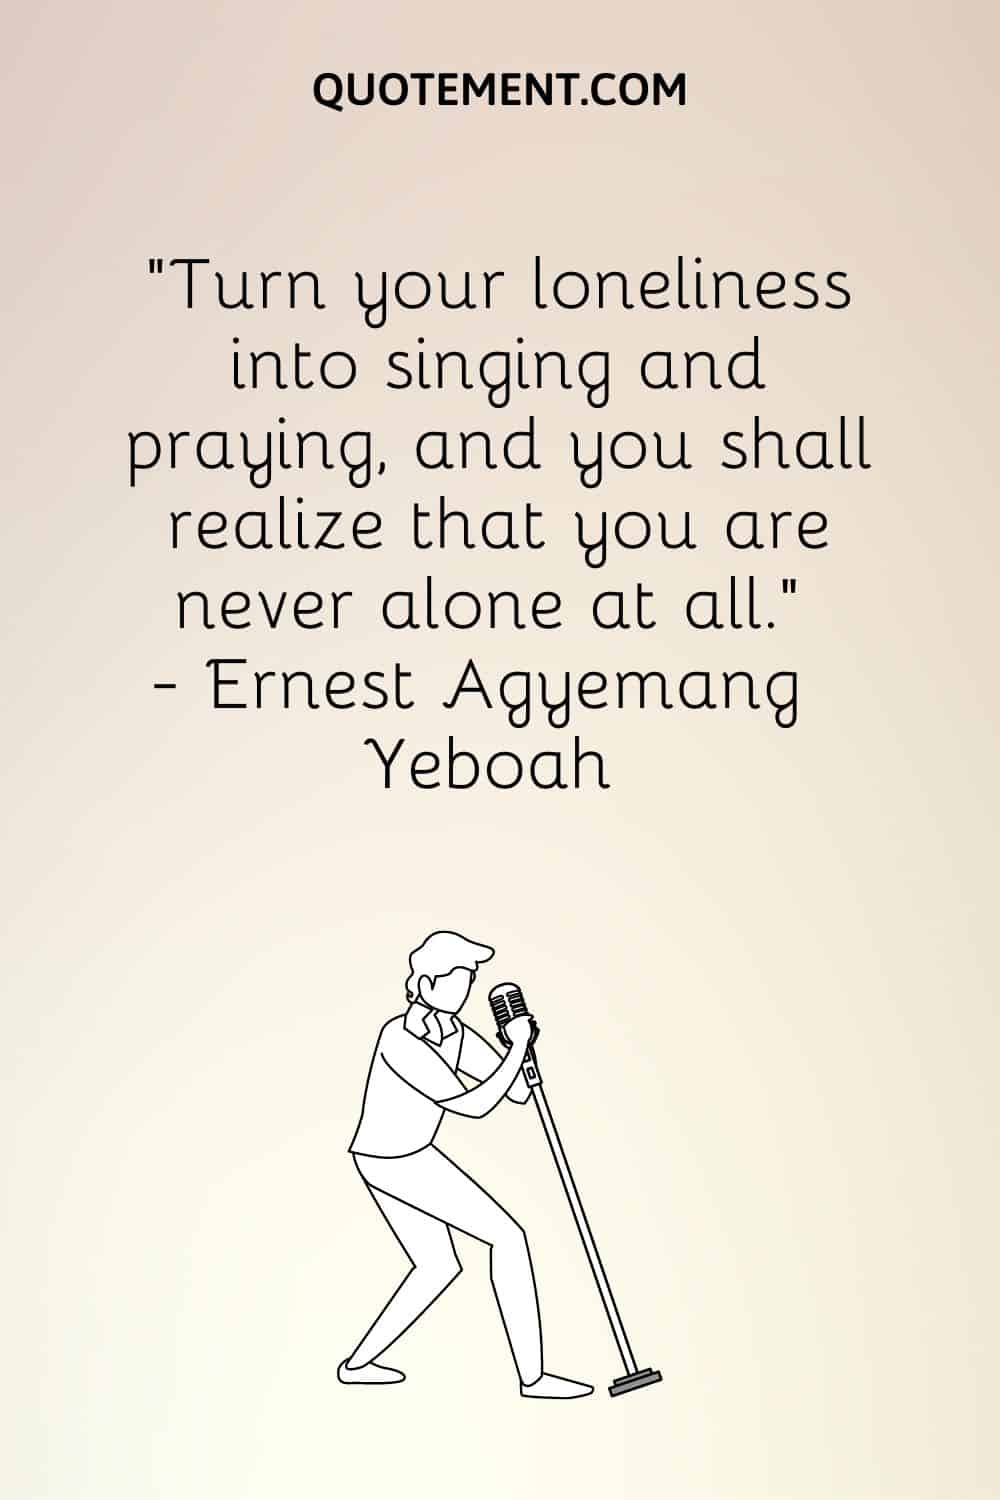 “Turn your loneliness into singing and praying, and you shall realize that you are never alone at all.” ― Ernest Agyemang Yeboah